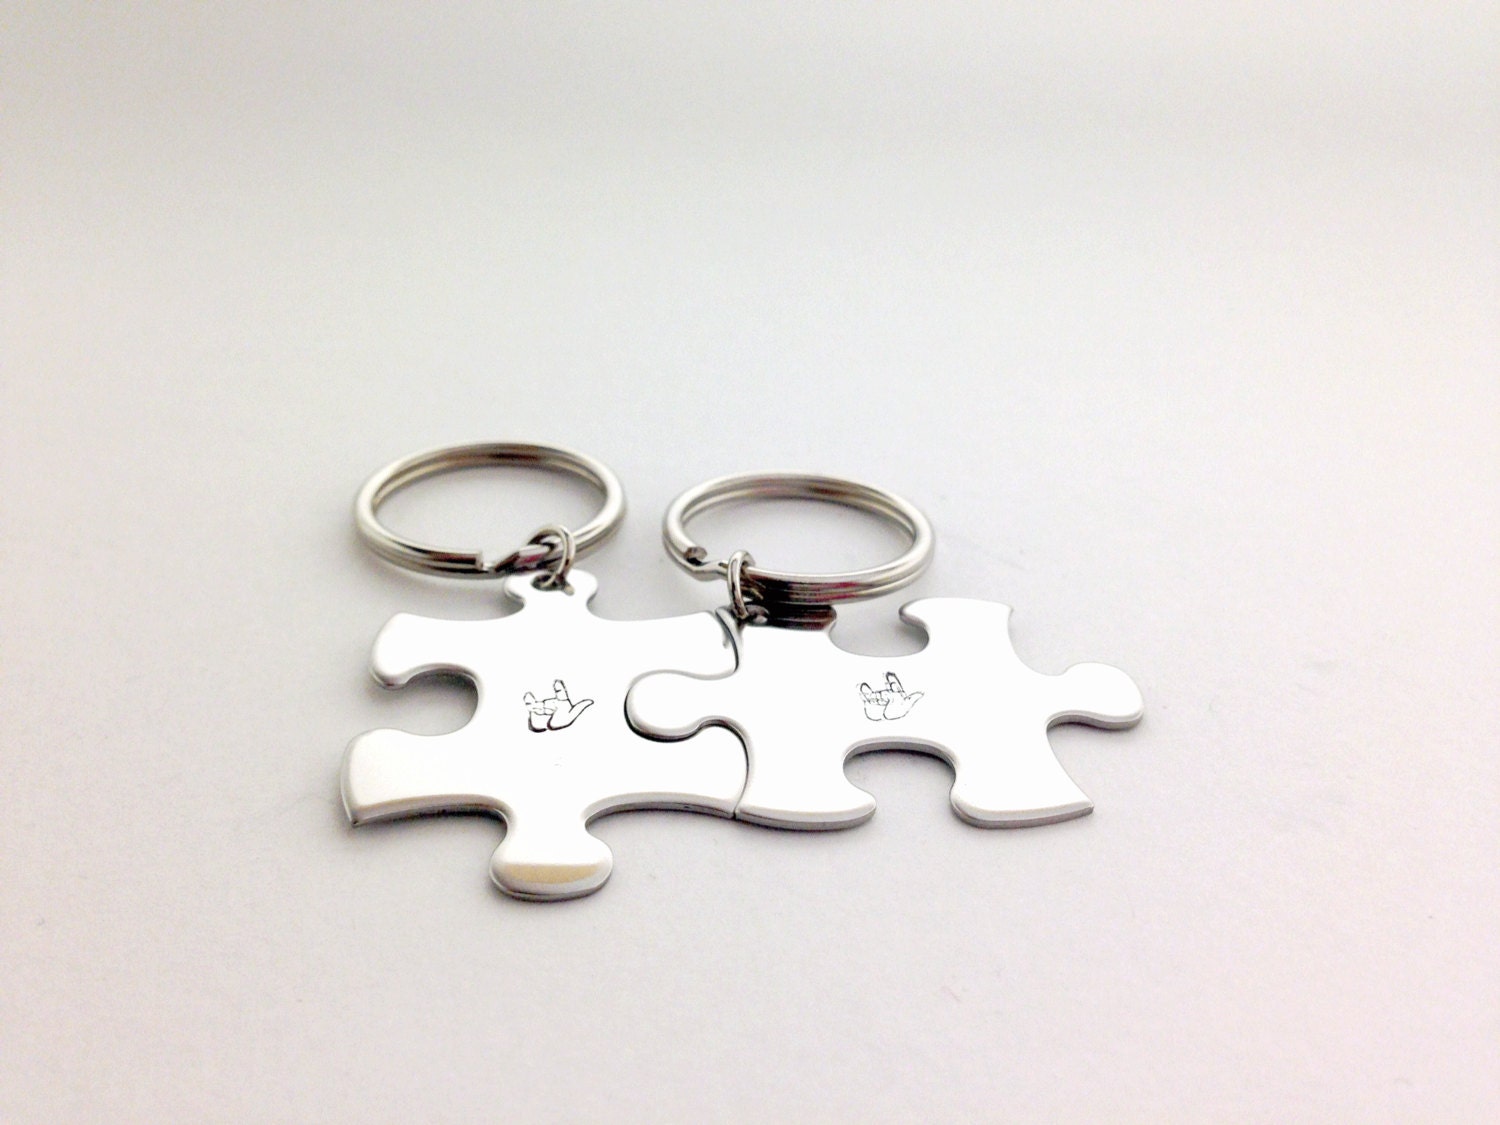 I Love You Keychain Sign Language Finger Spelling Puzzle Piece